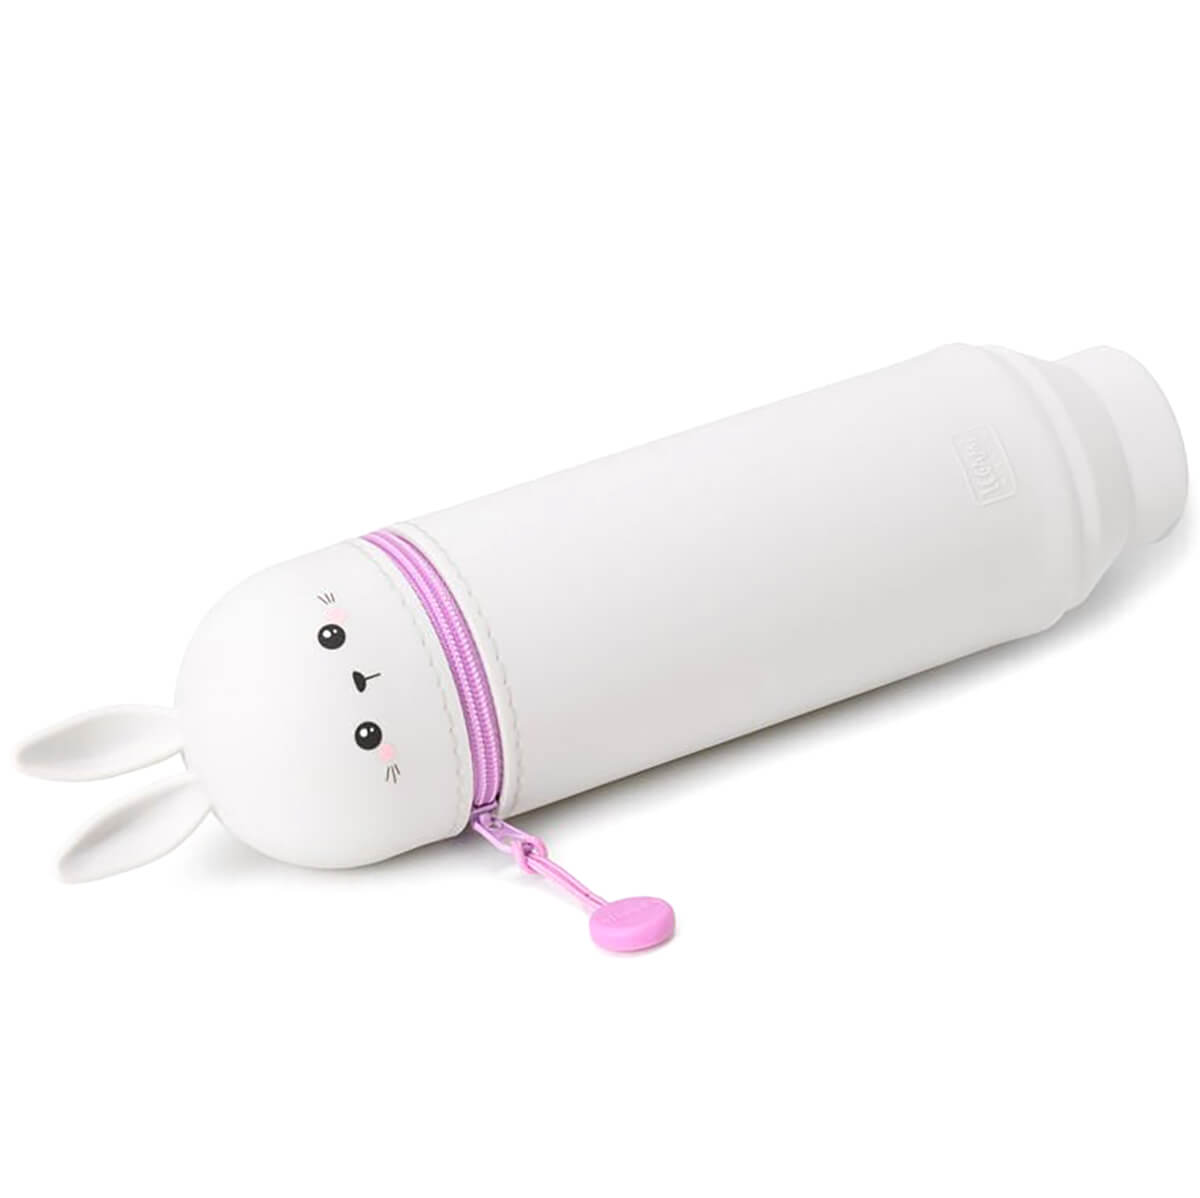 Bunny Kawaii Two In One Silicone Pencil Case by Legami – Junior Edition